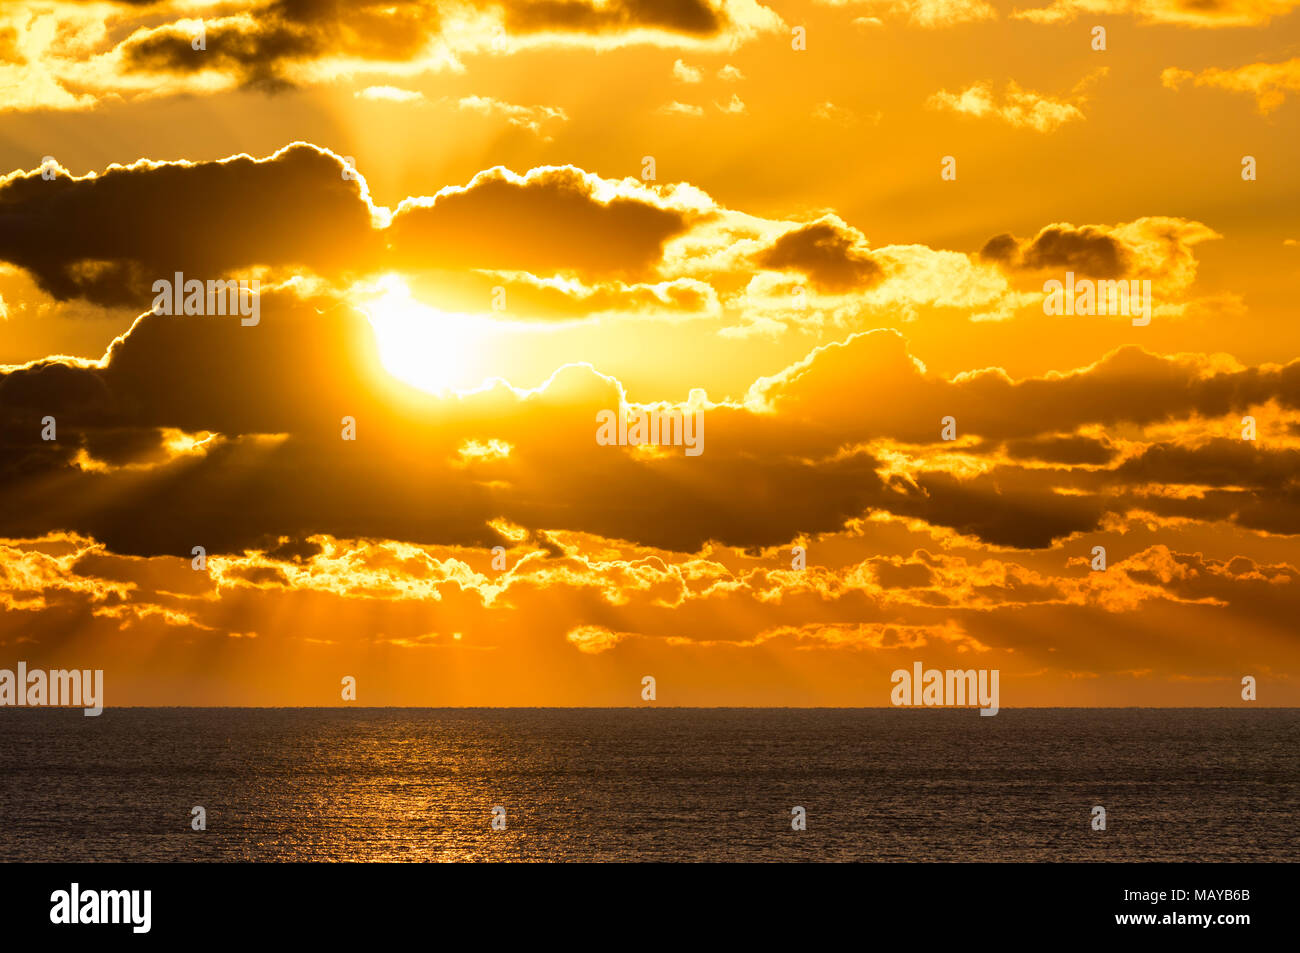 Dramatic sunset over water with rays of sun showing through and lighting up the sea. Stock Photo